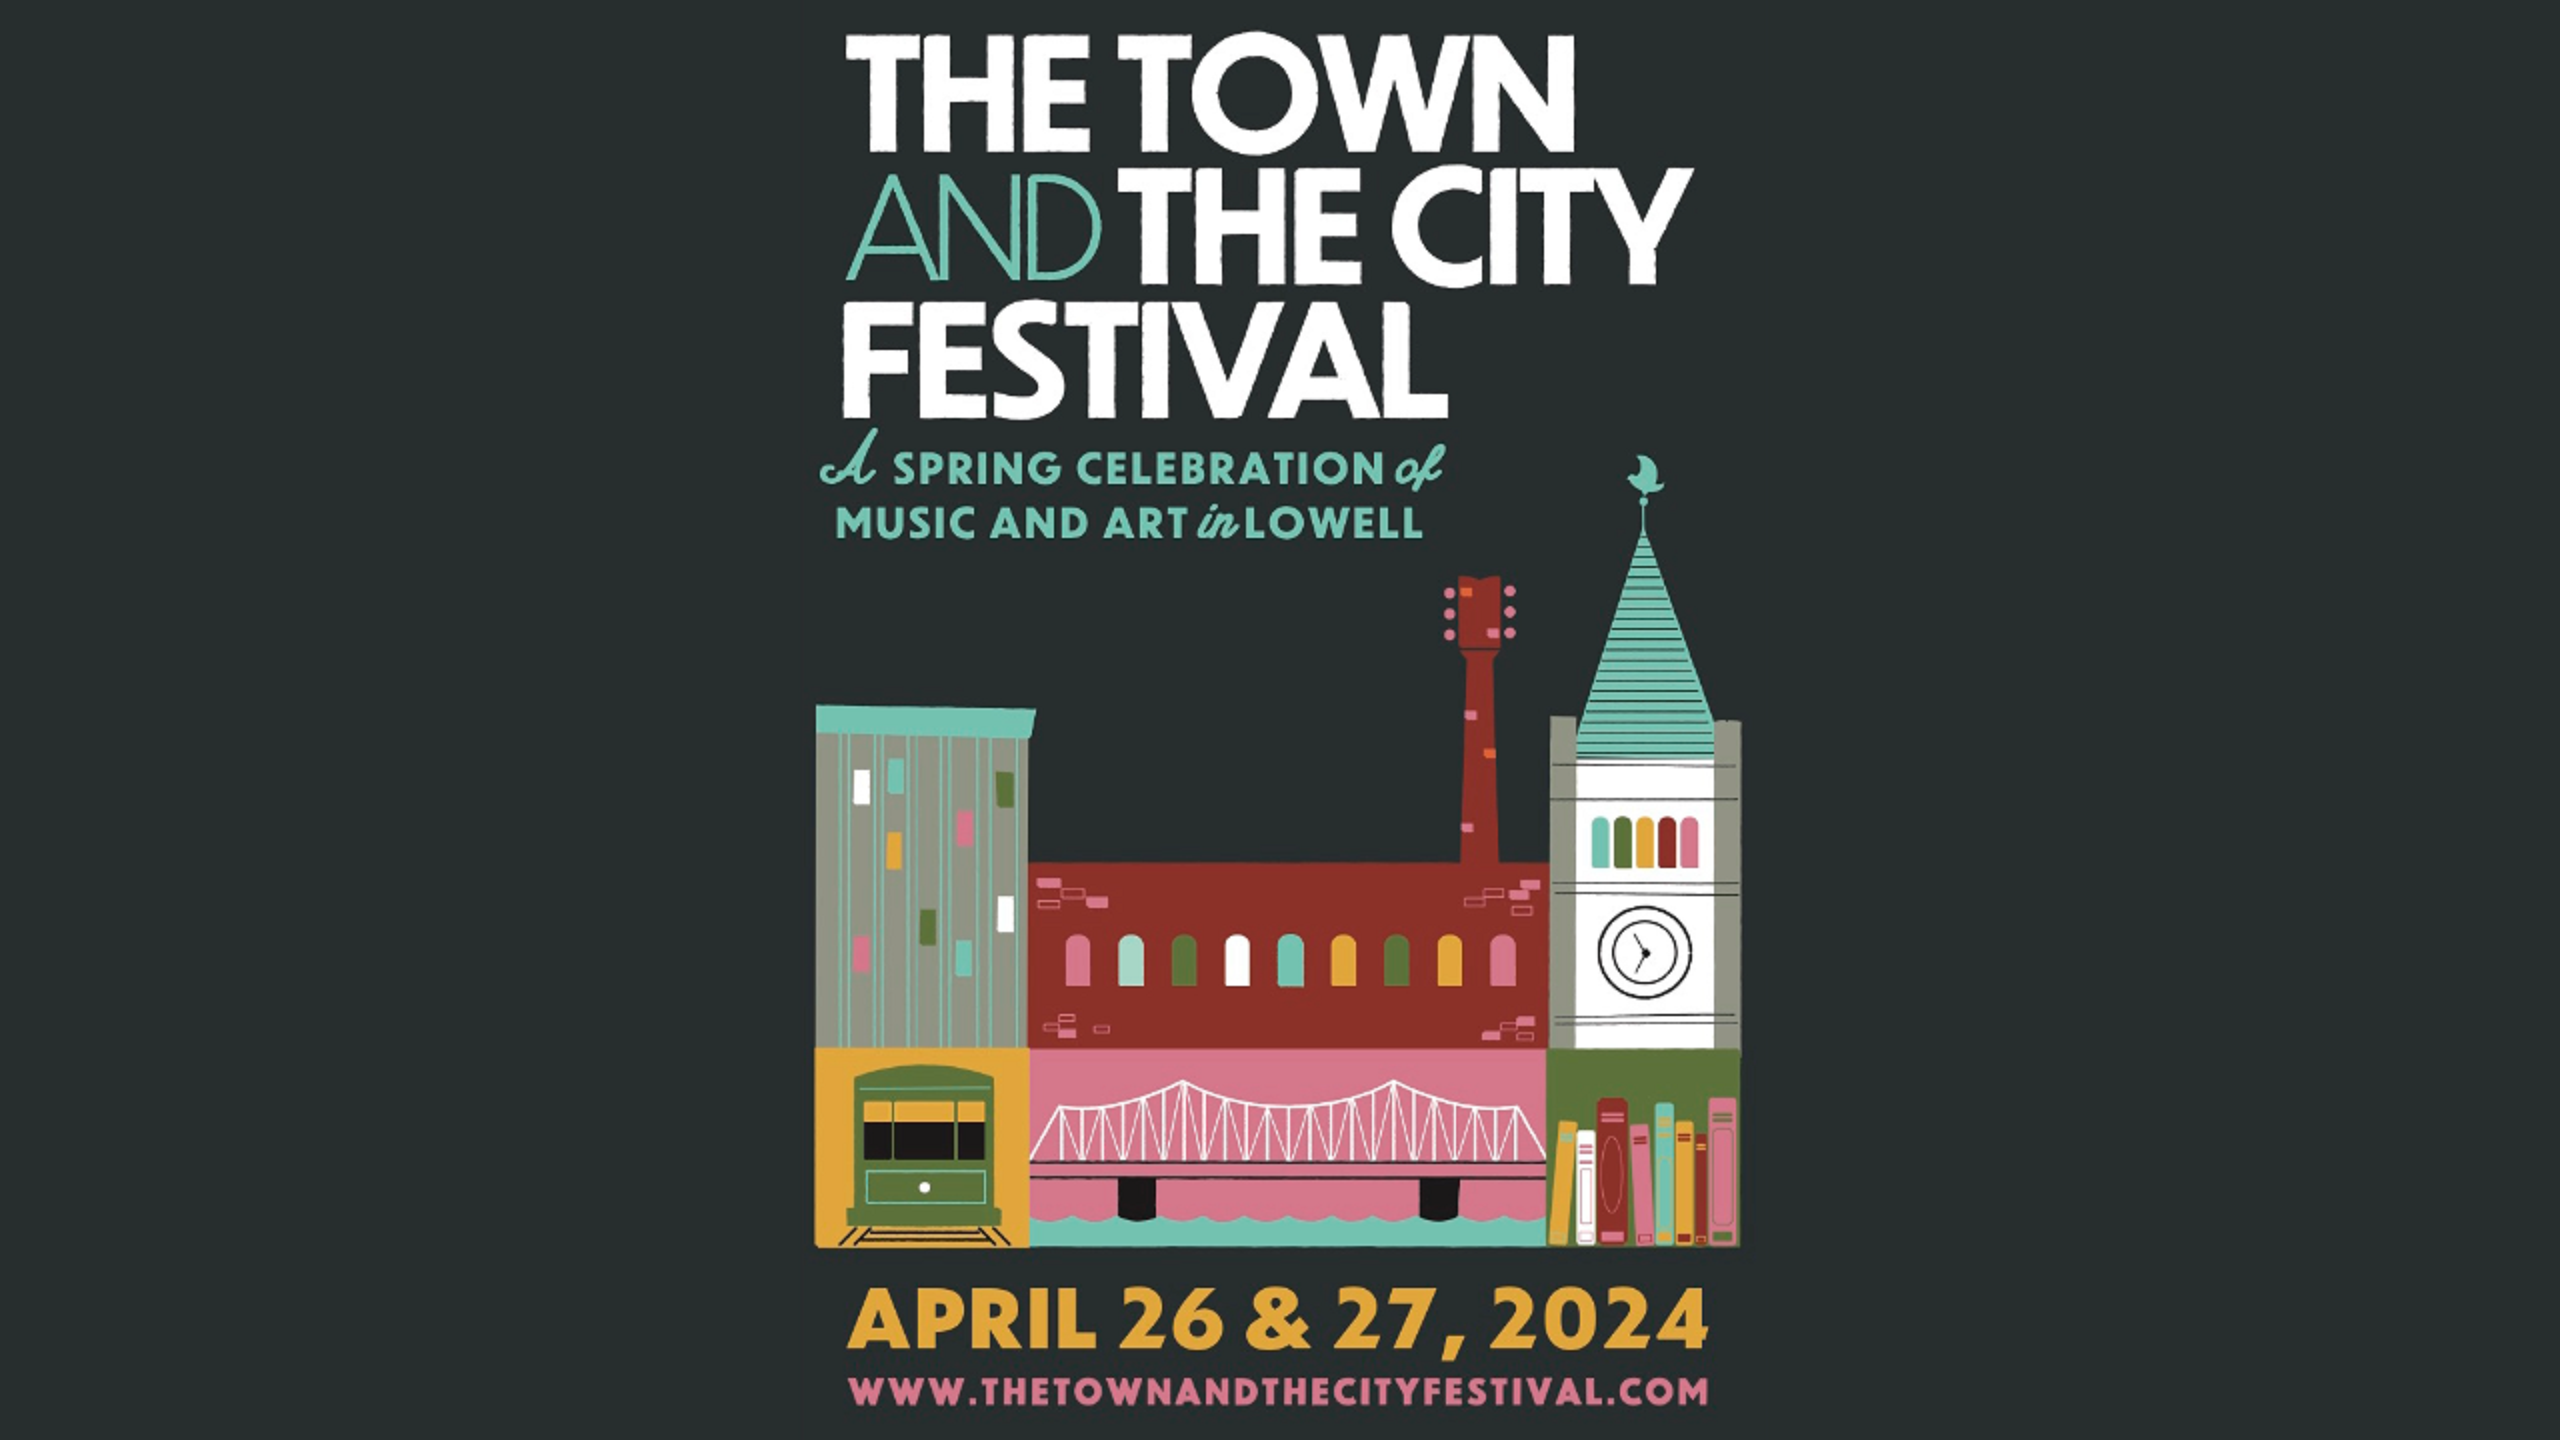 THE TOWN AND THE CITY FESTIVAL 2024 ANNOUNCES INITIAL PERFORMER LINEUP